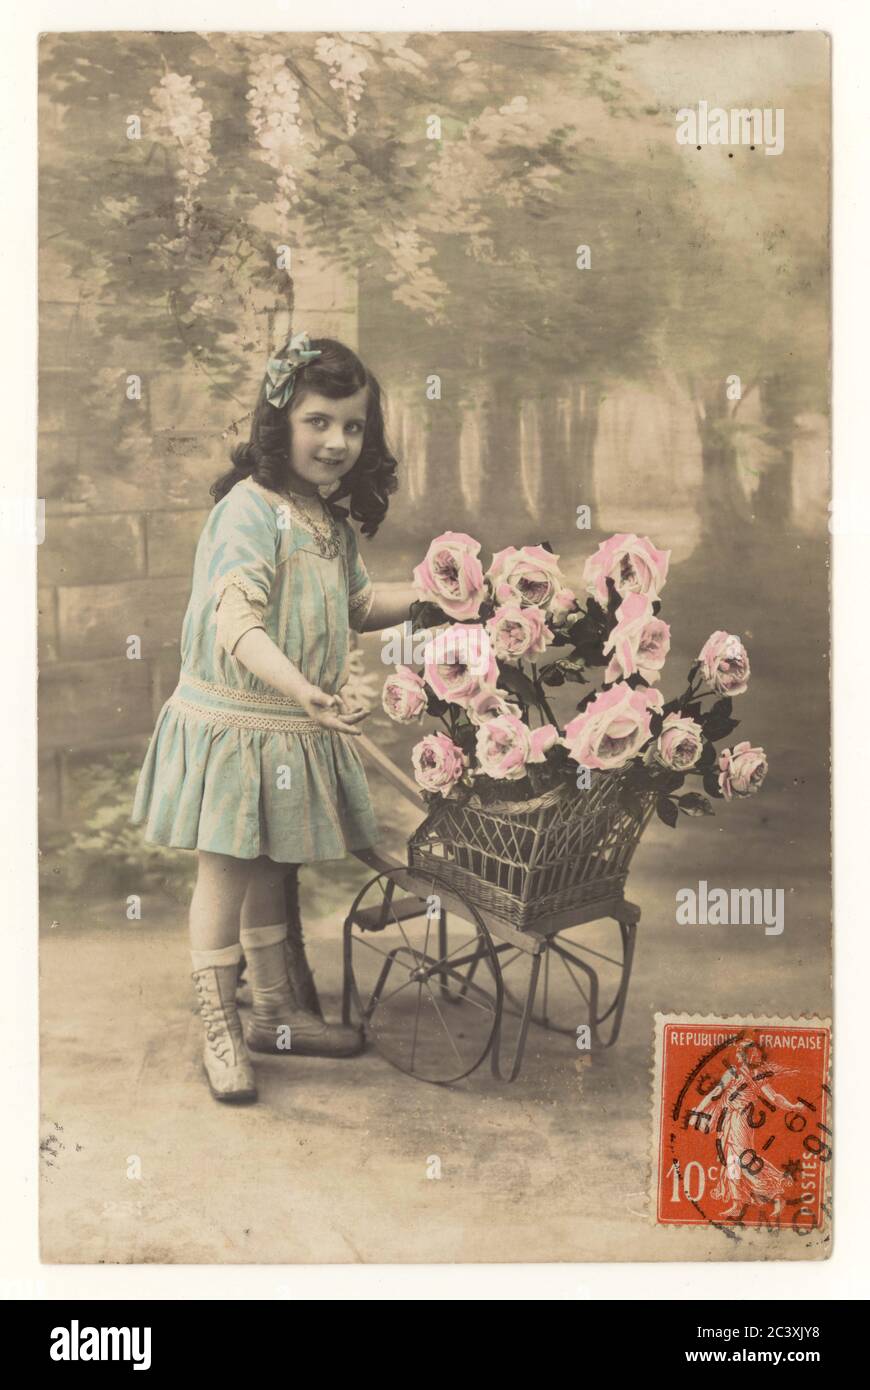 Early 1900's sentimental French postcard of young girl with wheelbarrow full of roses, postmarked 19 Aug 1912, France Stock Photo